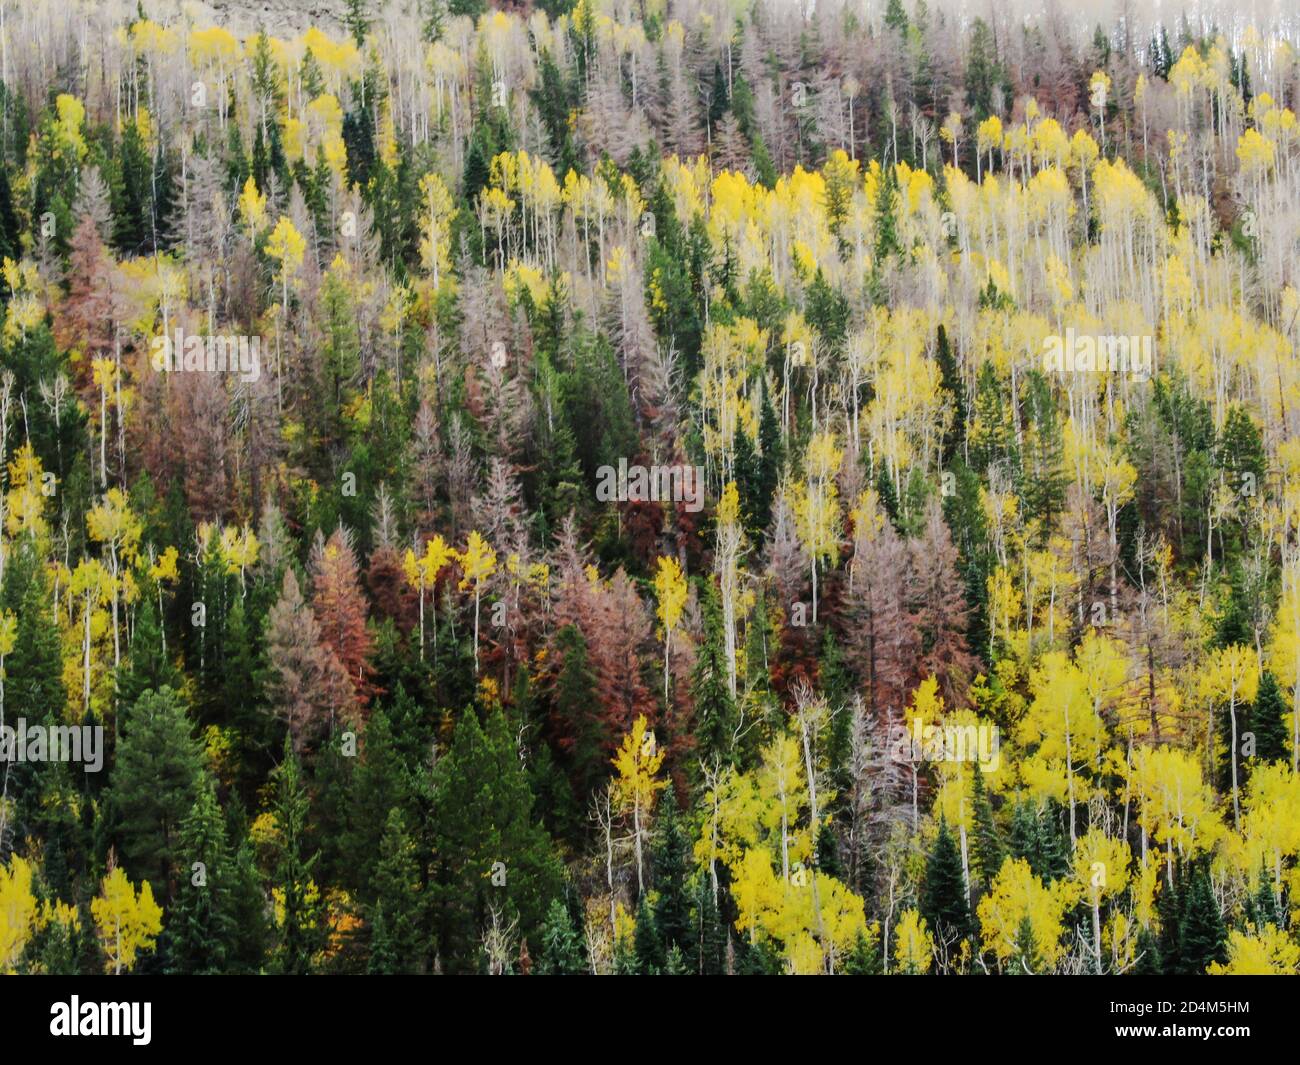 The forested slopes the La Sal Mountains of western Utah, USA, covered in Yellow colored Quaking Aspen, Dark green Douglas-fir and various dead pine t Stock Photo